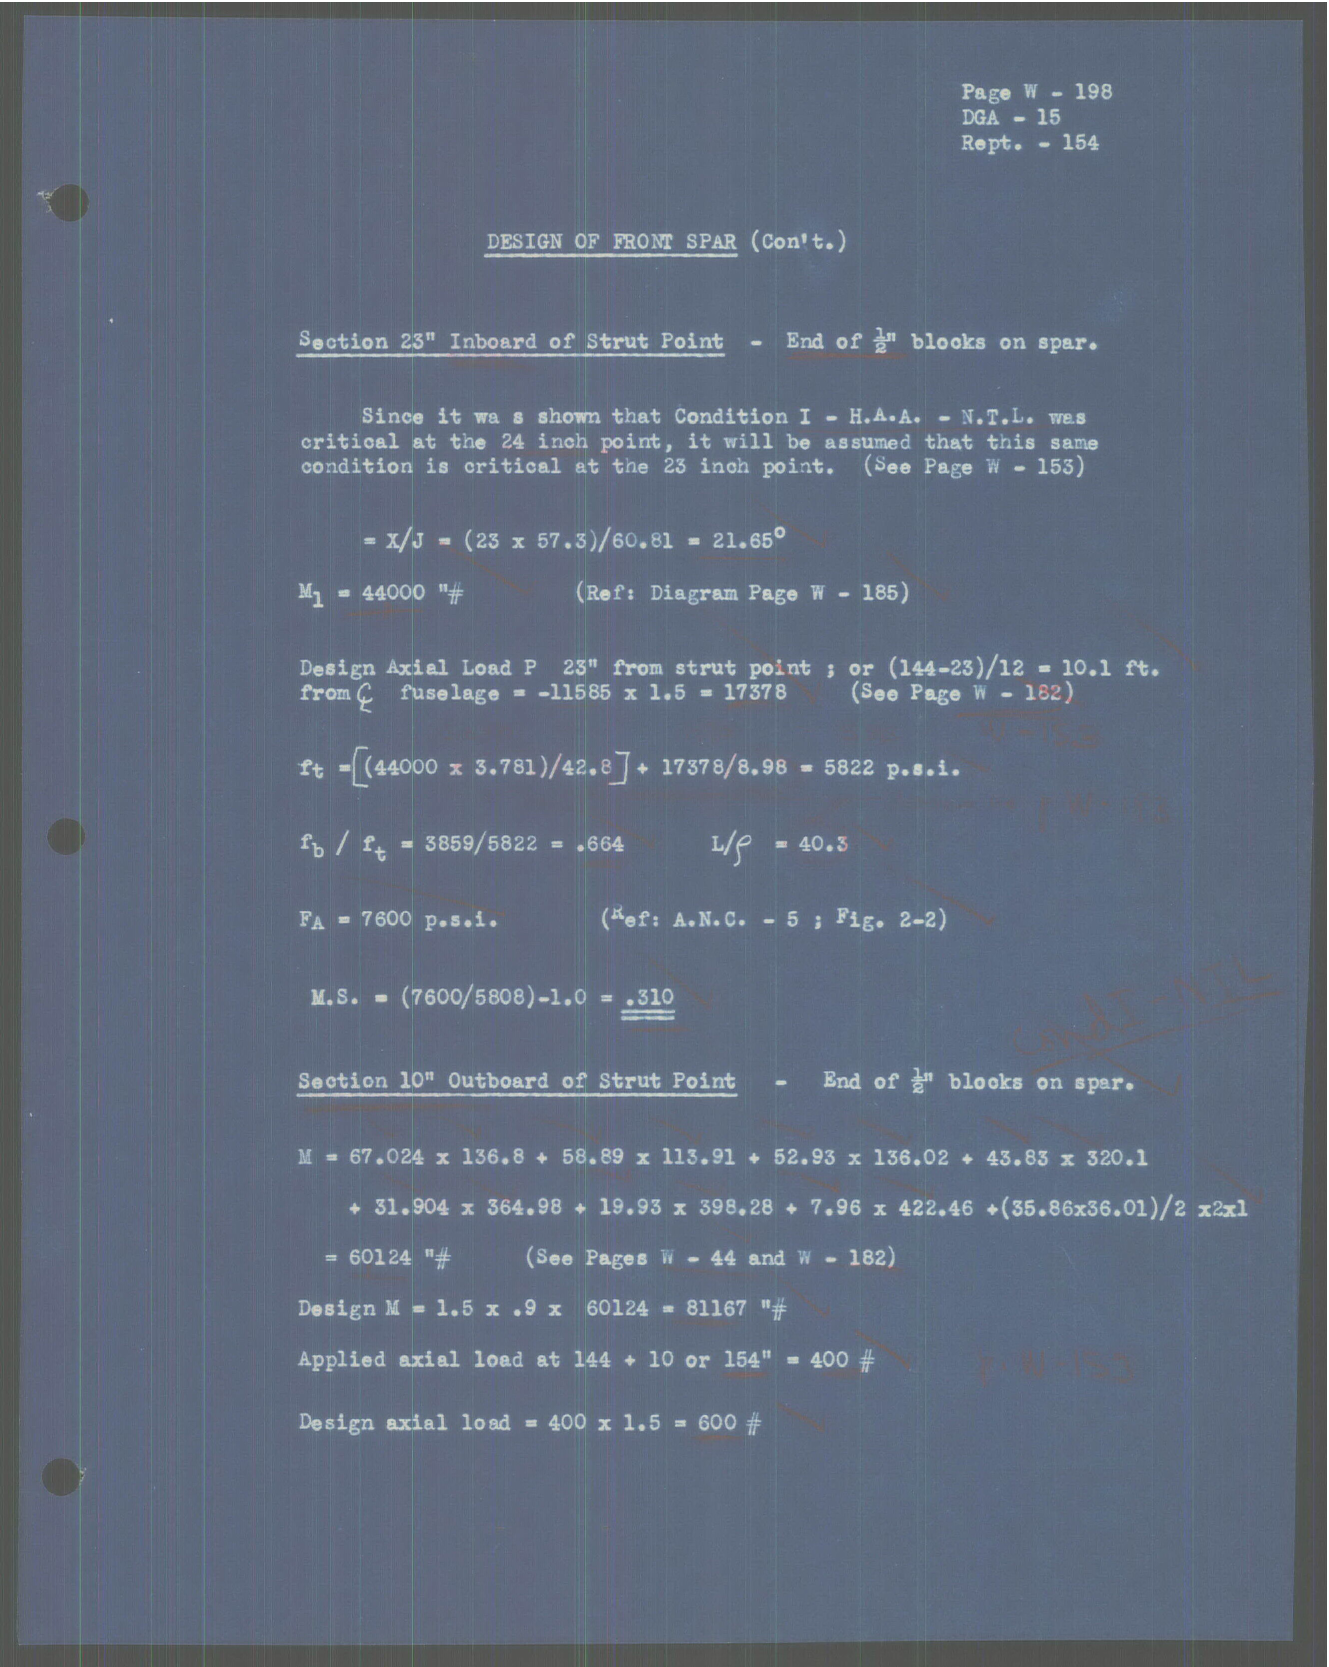 Sample page 459 from AirCorps Library document: Report 154, Wing Analysis, DGA-15